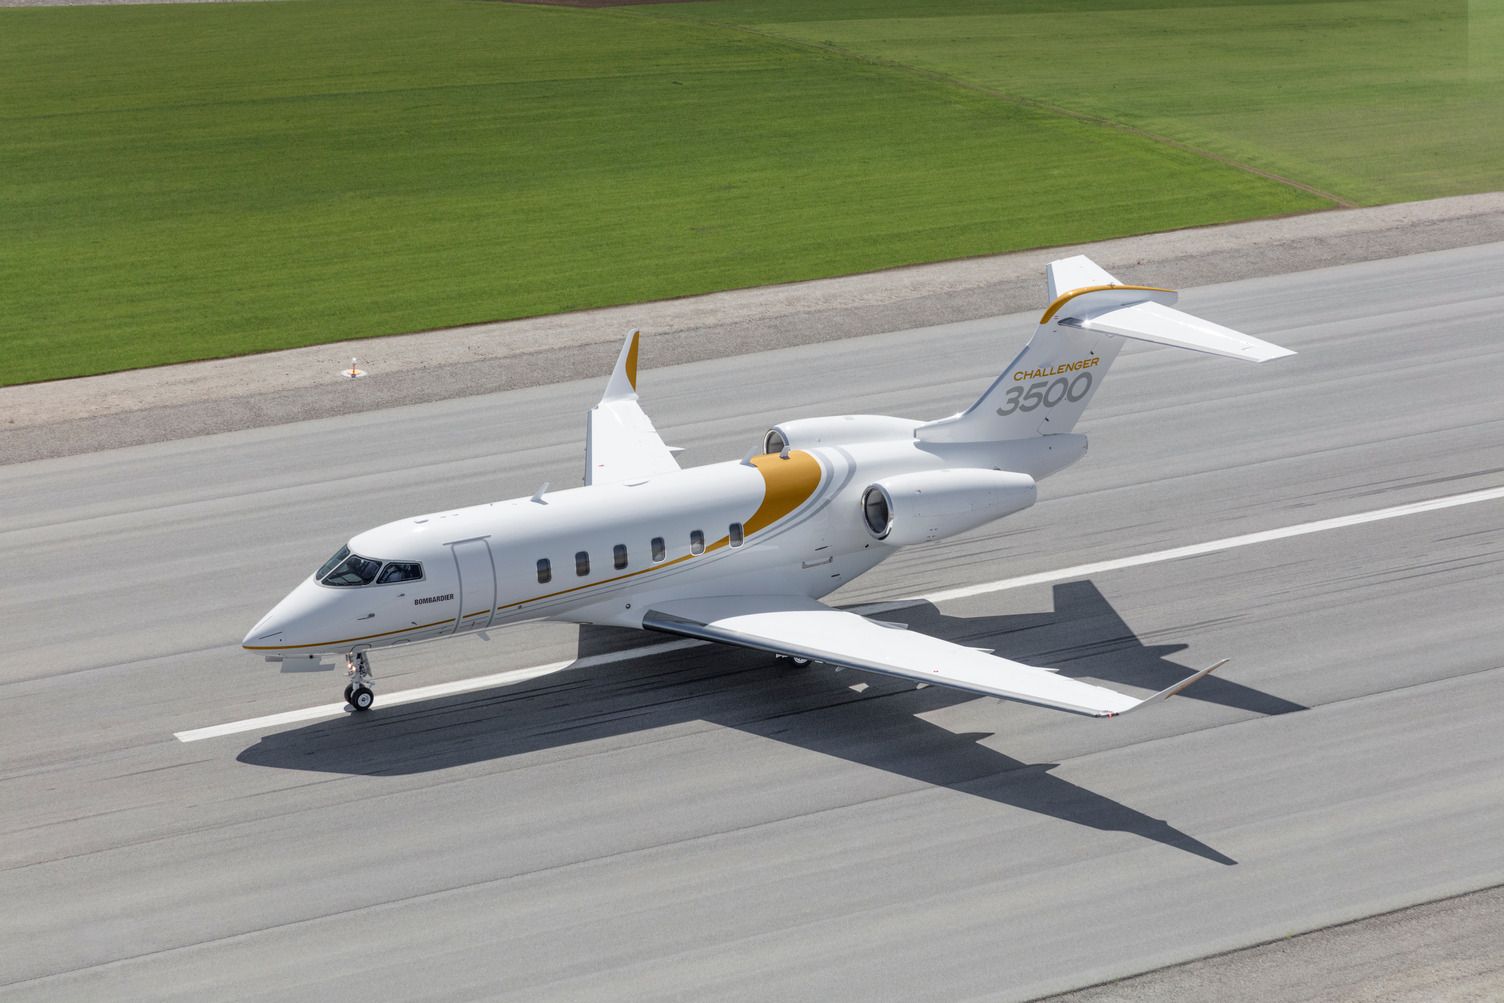 A Bombardier Challenger 3500 on a runway.